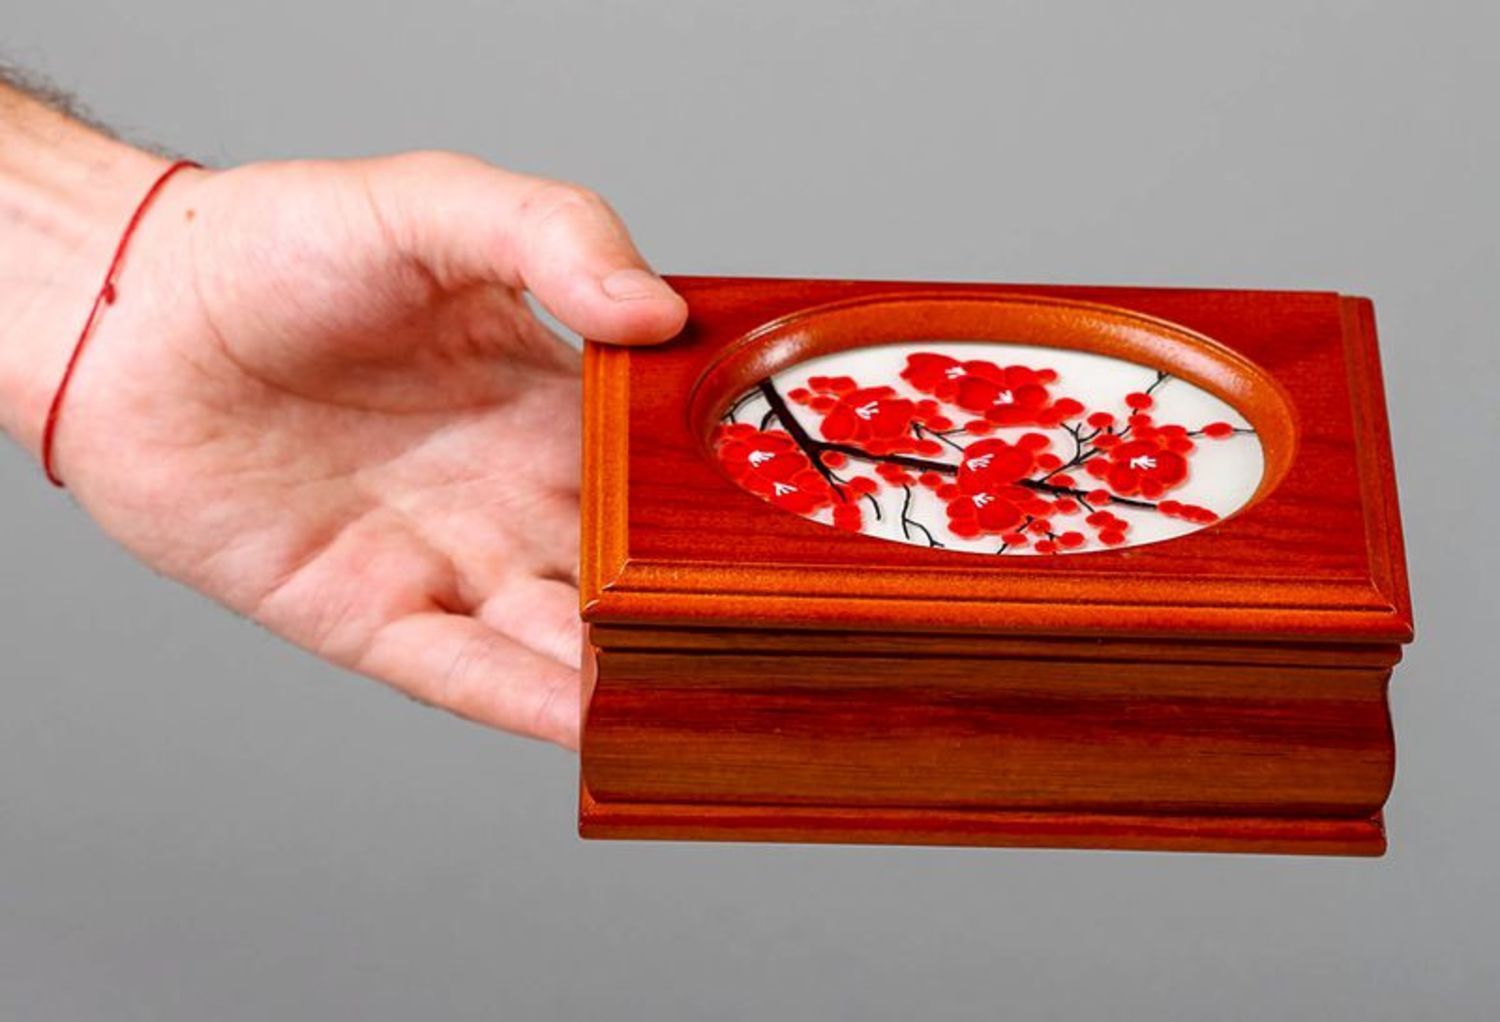 Stained glass jewelry box Guelder rose photo 3